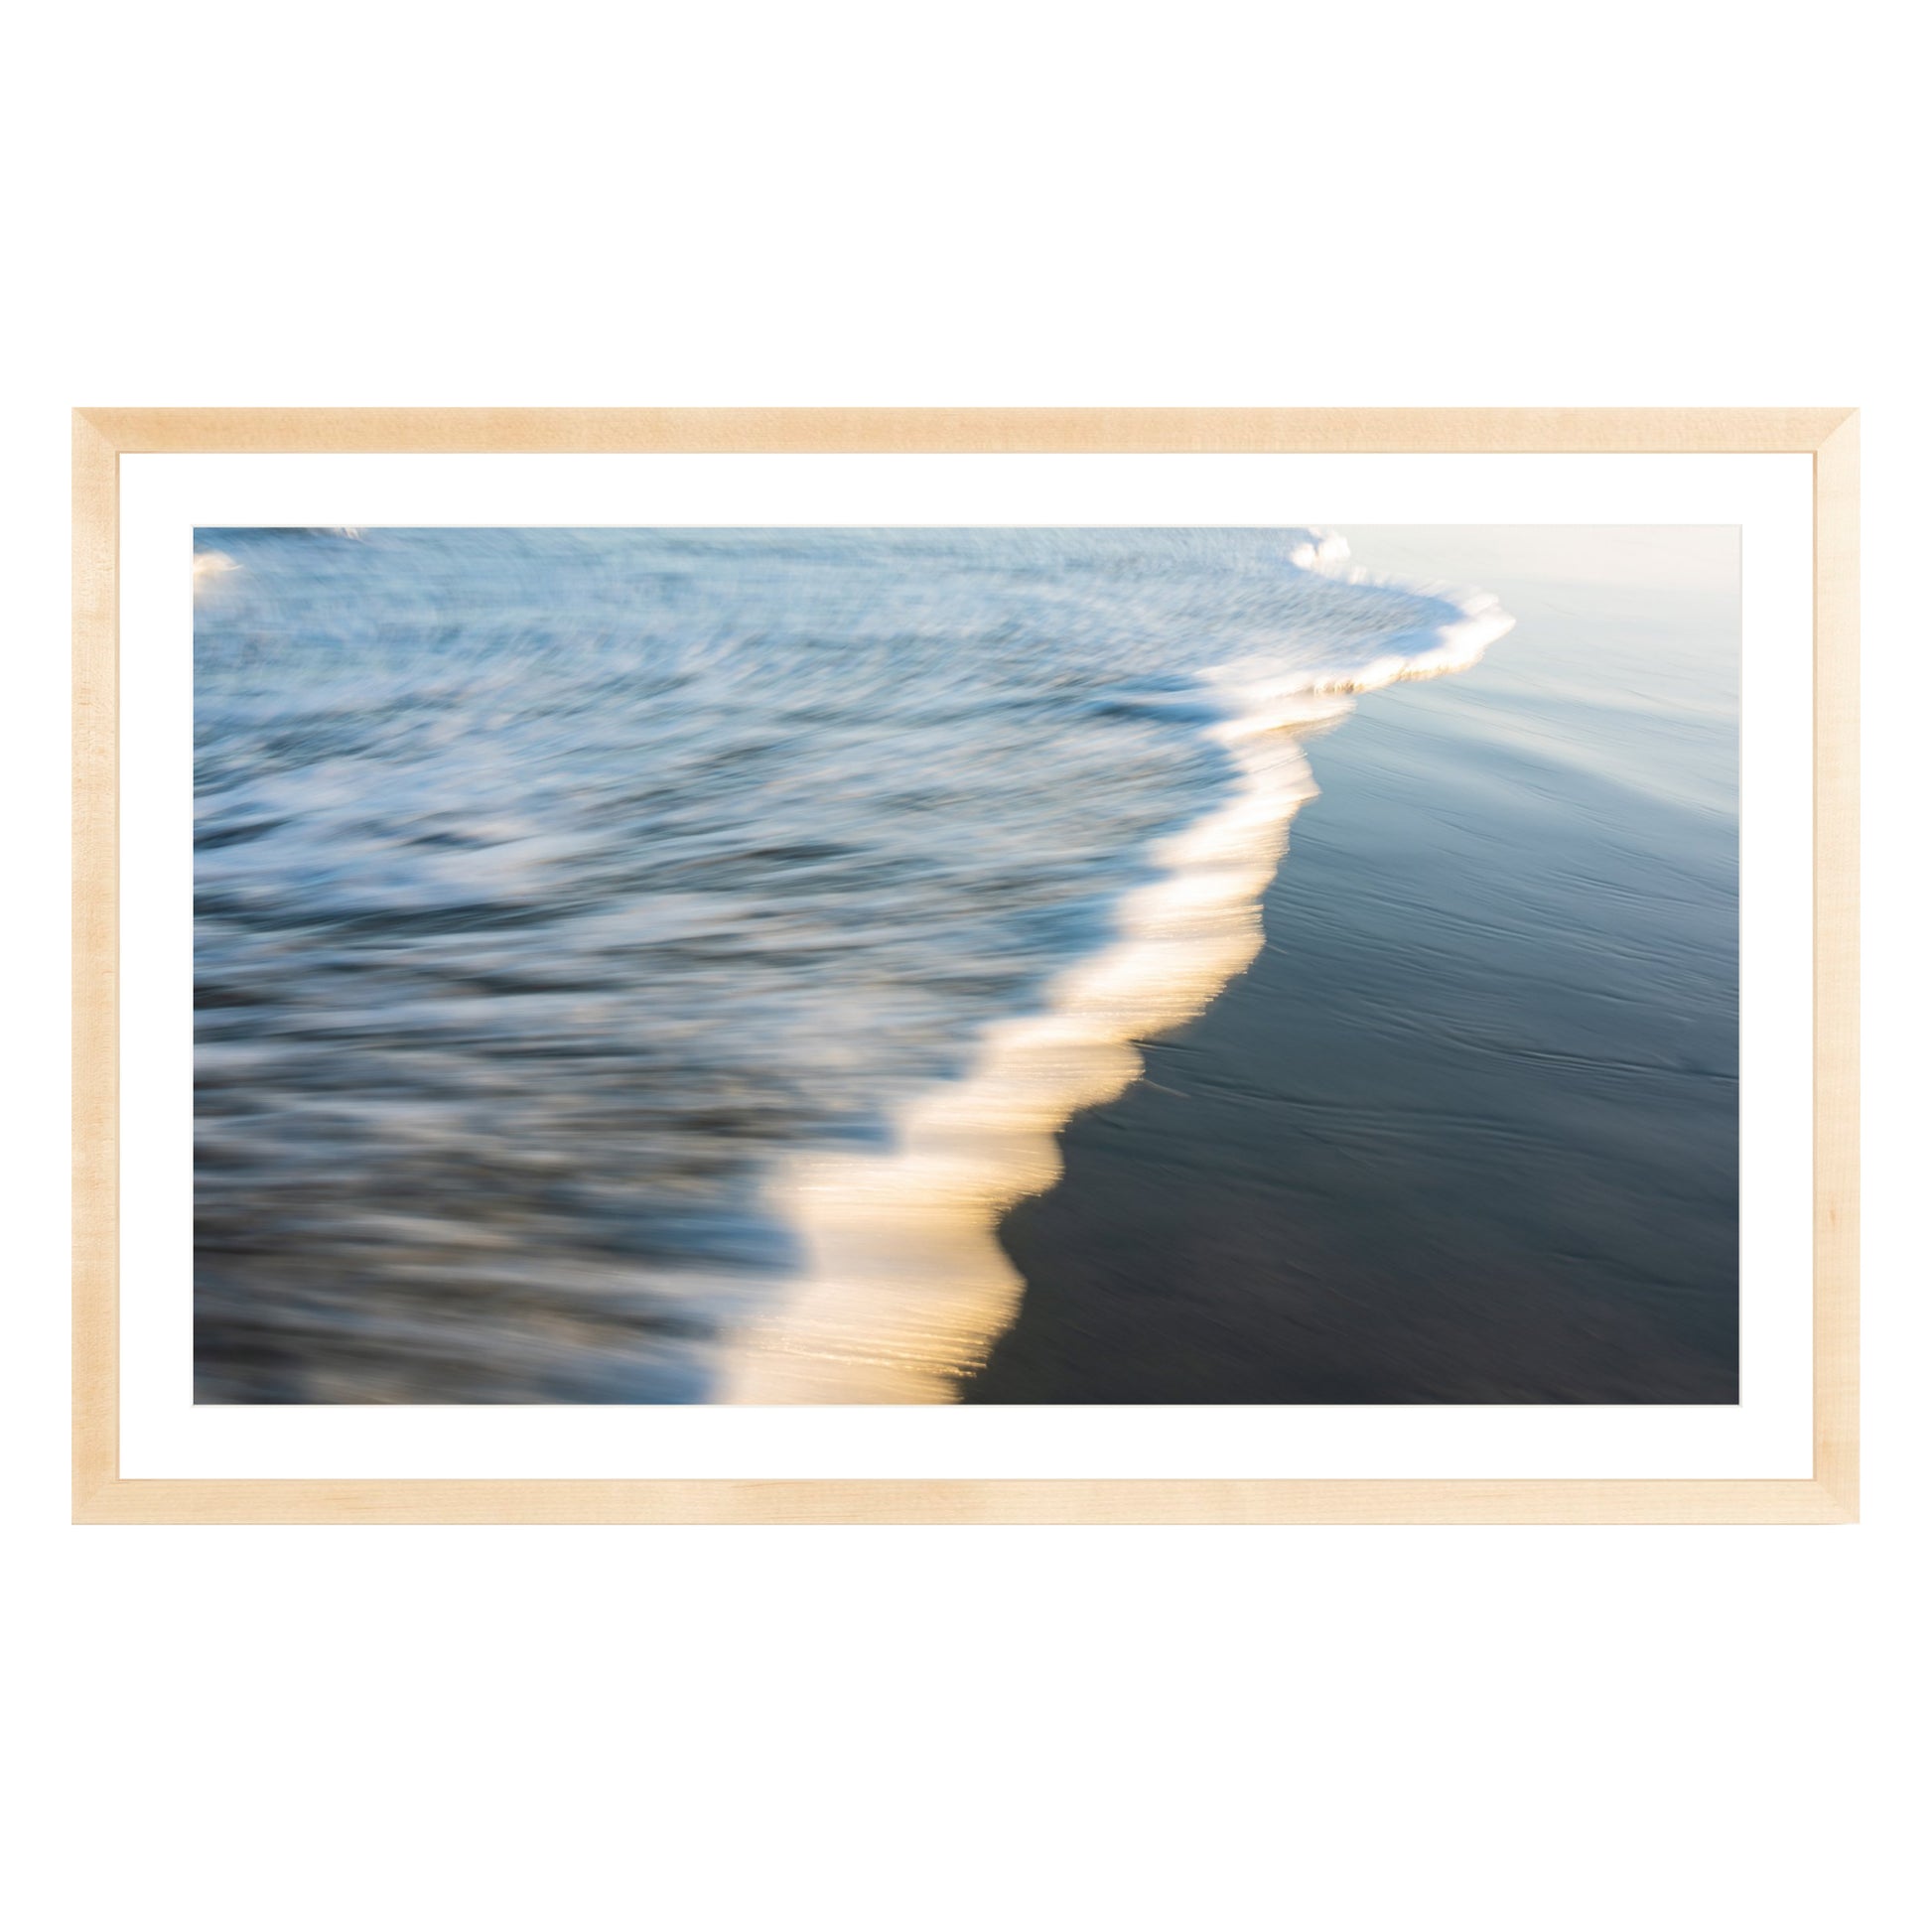 Photograph of wave at Atlantic Ocean framed in natural wood with white mat